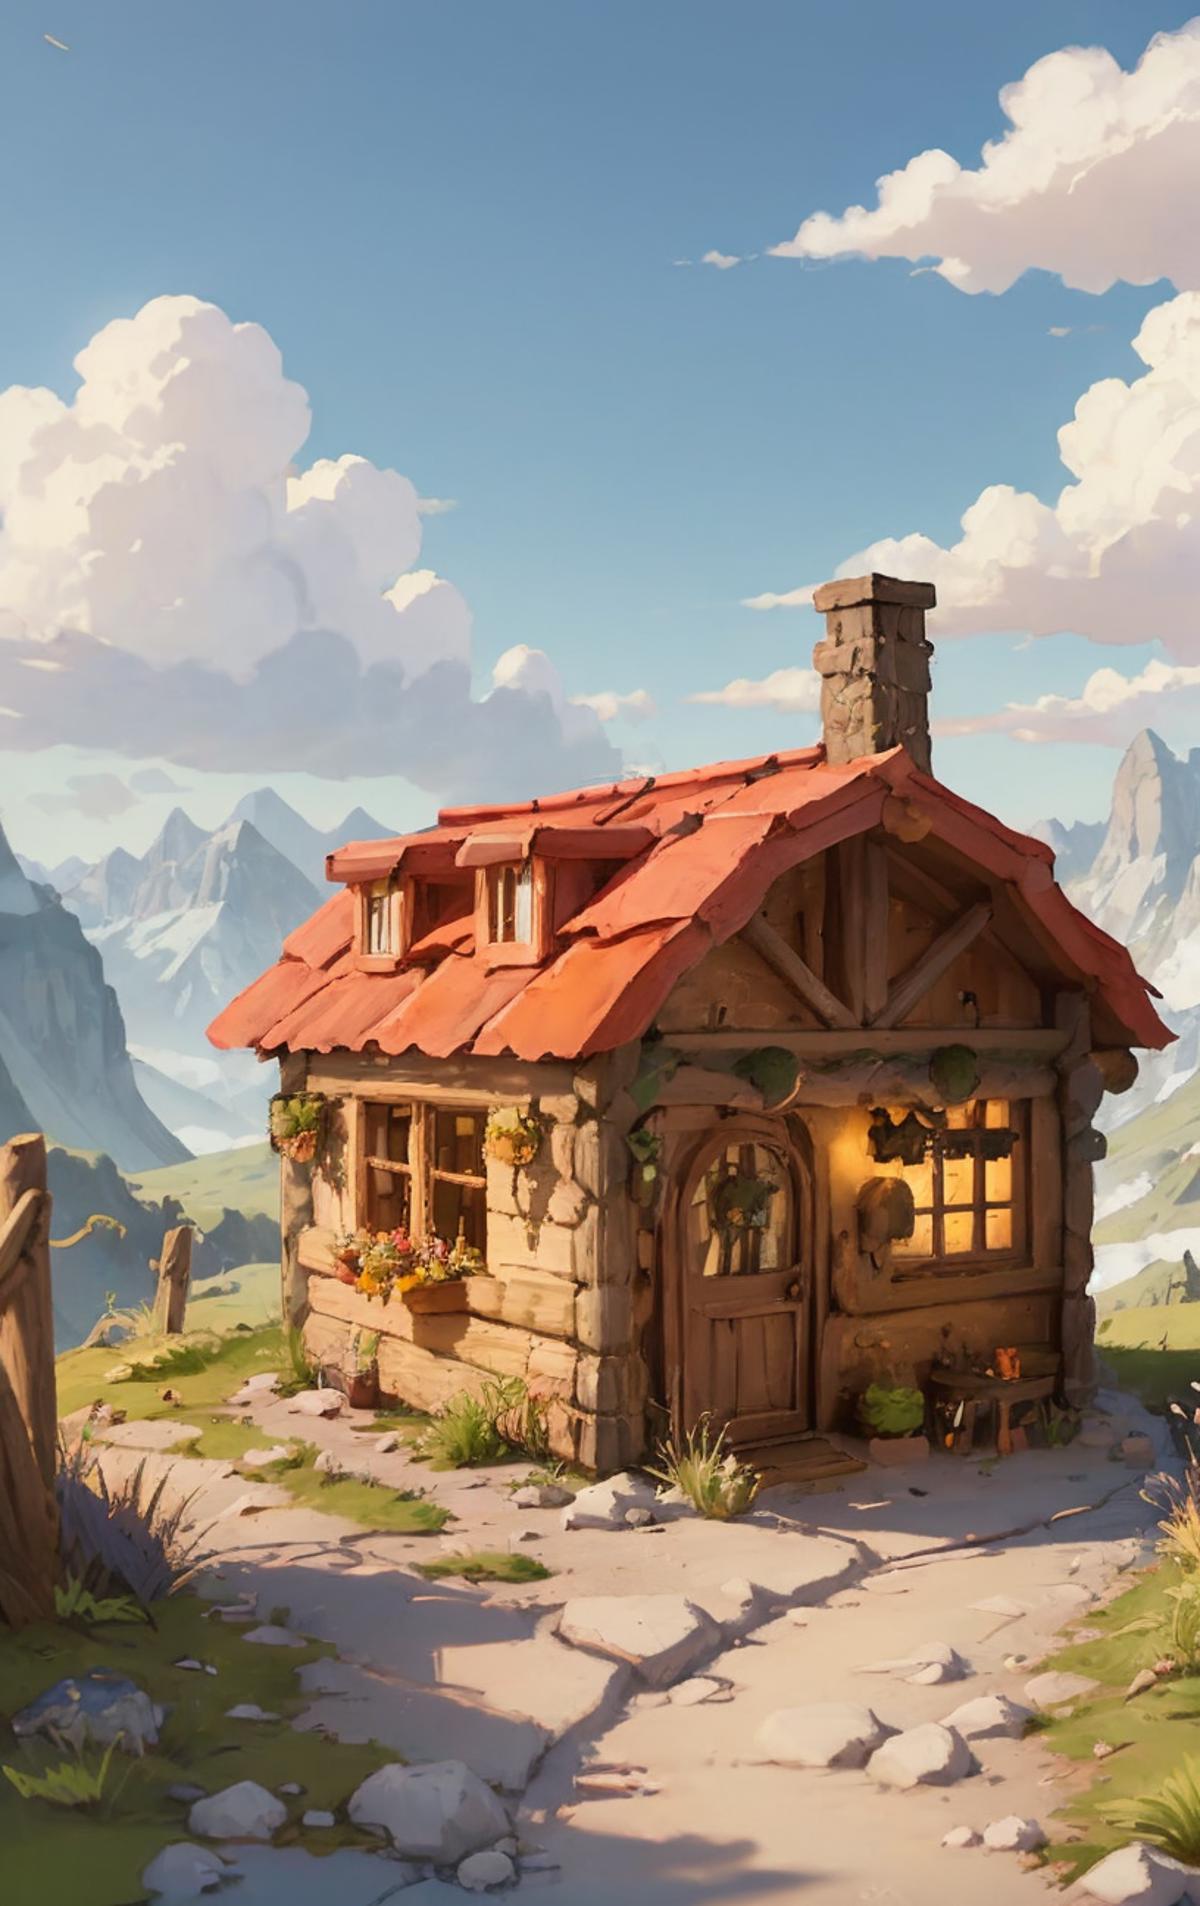 LITTLE HOUSE image by nuaion